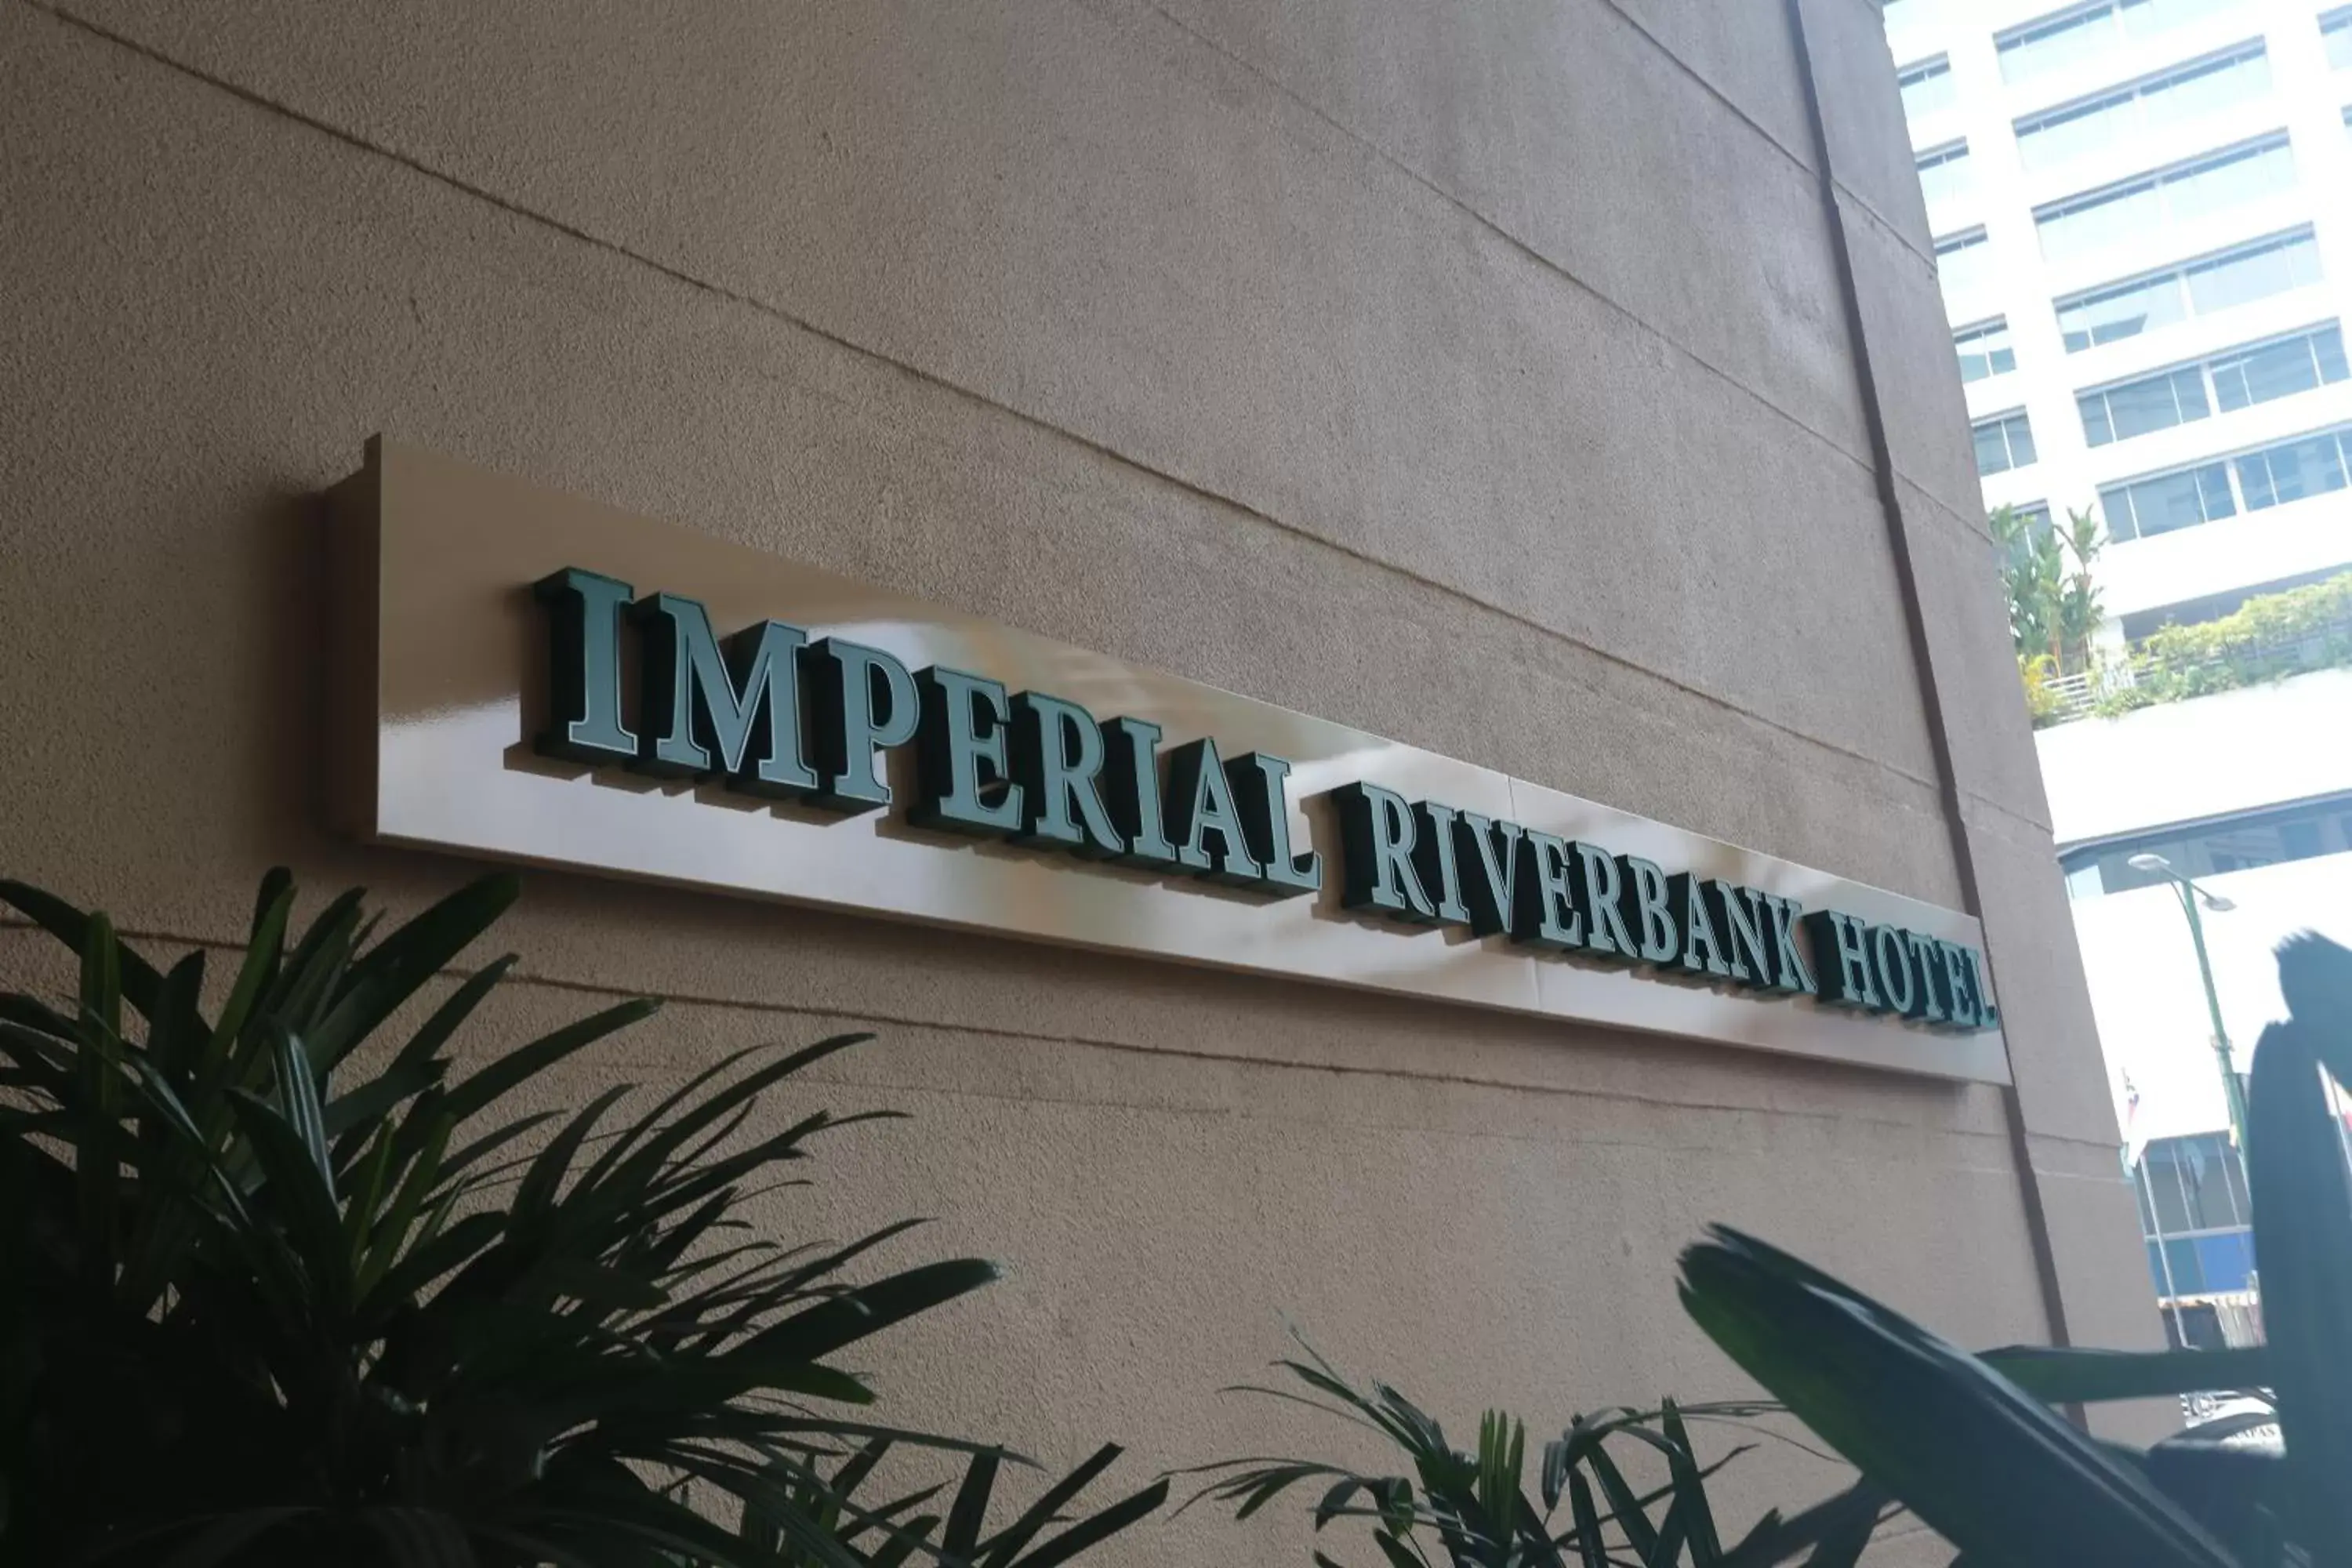 Property logo or sign, Property Logo/Sign in Imperial Riverbank Hotel Kuching